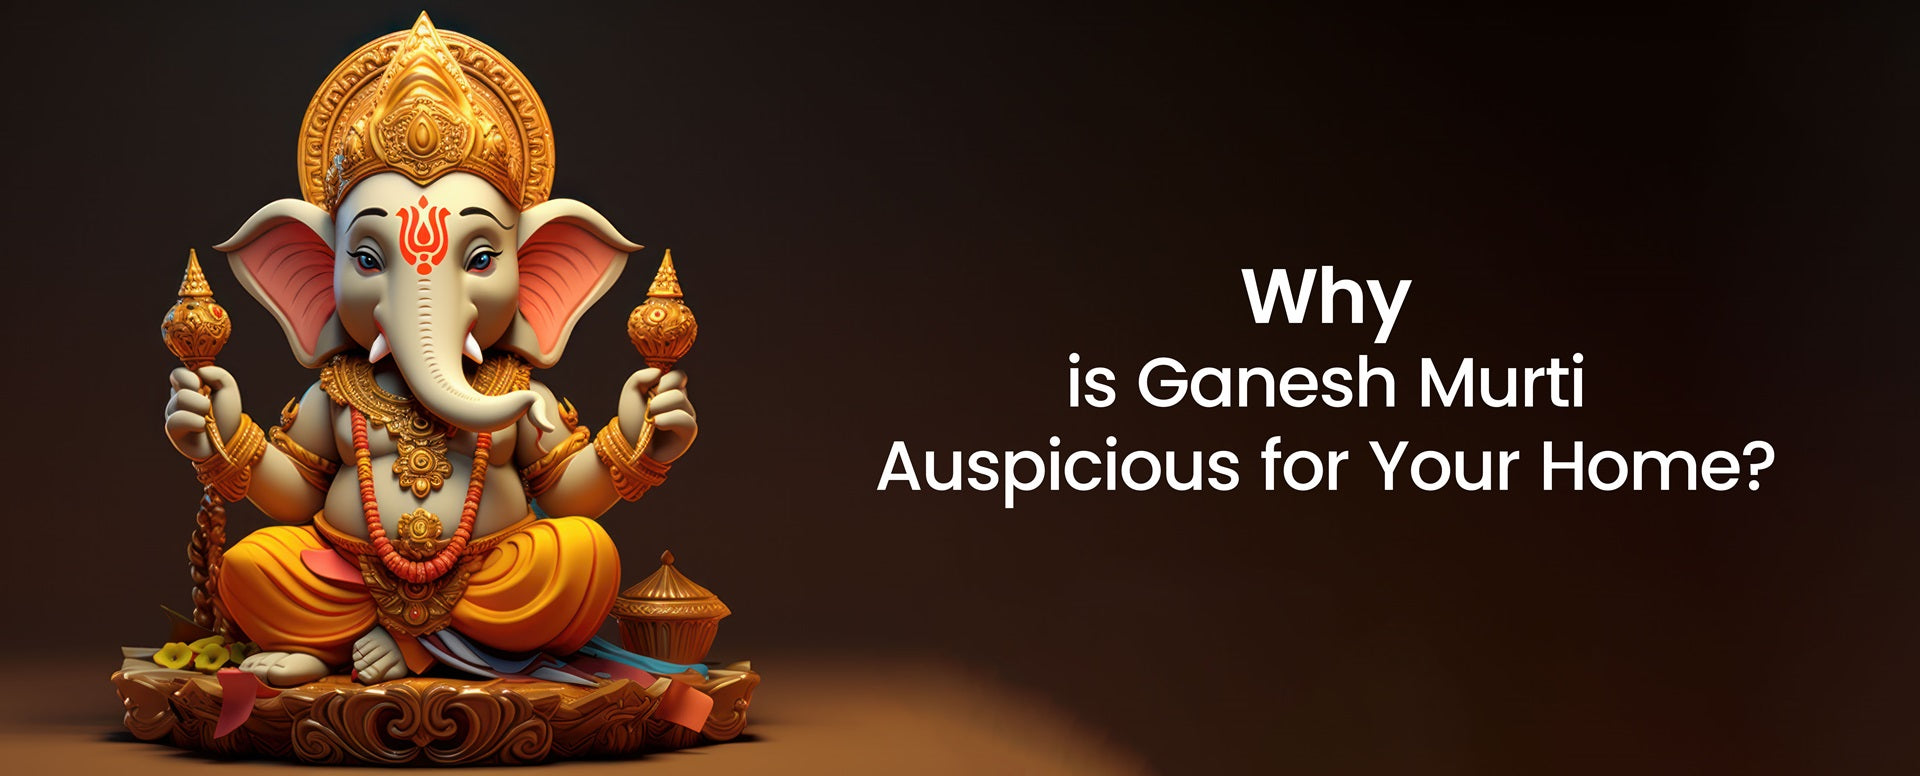 Why is Ganesh Murti Auspicious for Your Home?